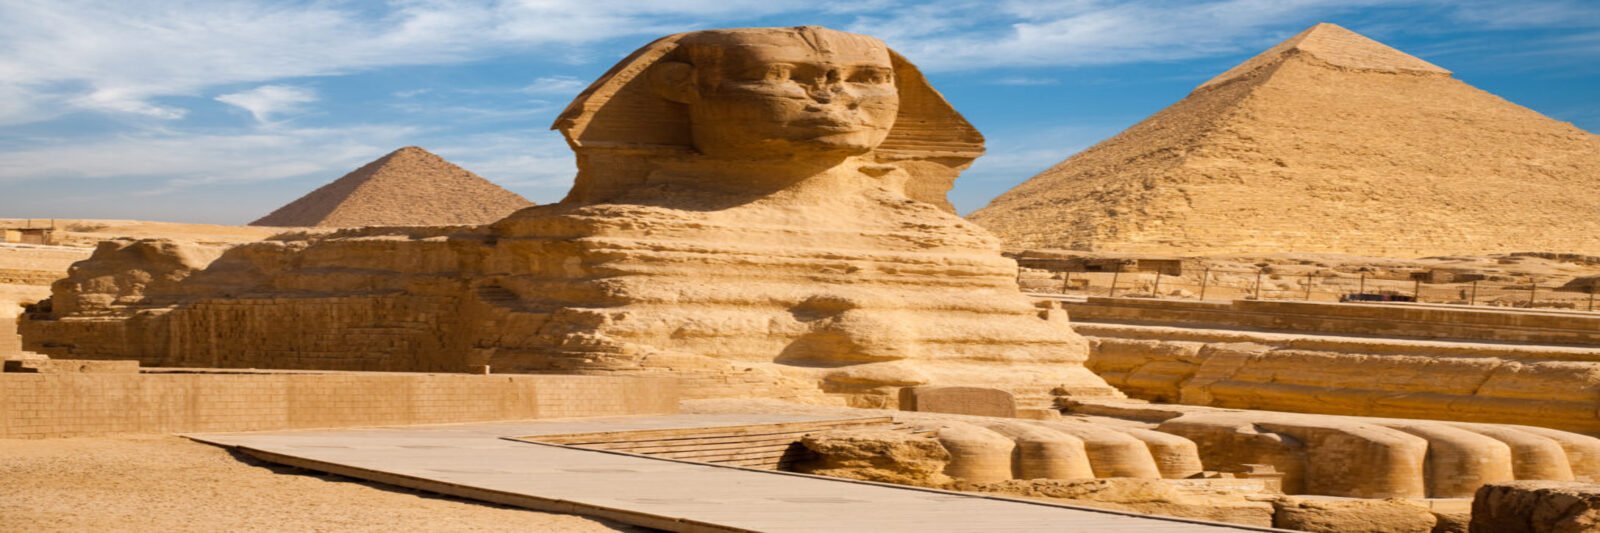 EXCITING EGYPT 8 Nights / 9 Days